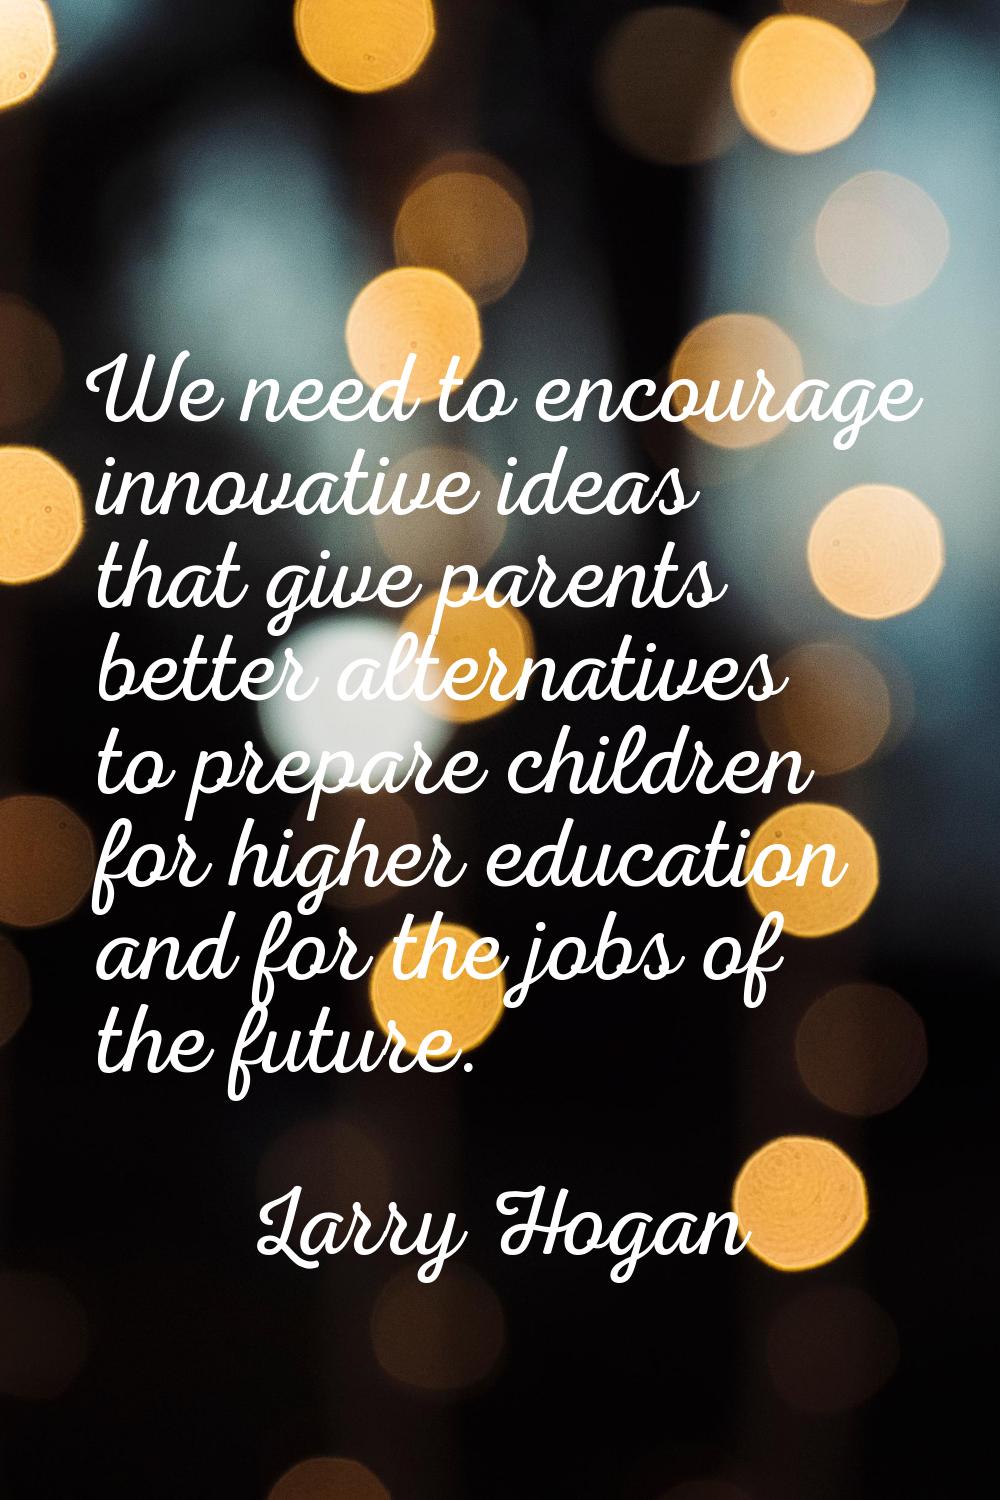 We need to encourage innovative ideas that give parents better alternatives to prepare children for